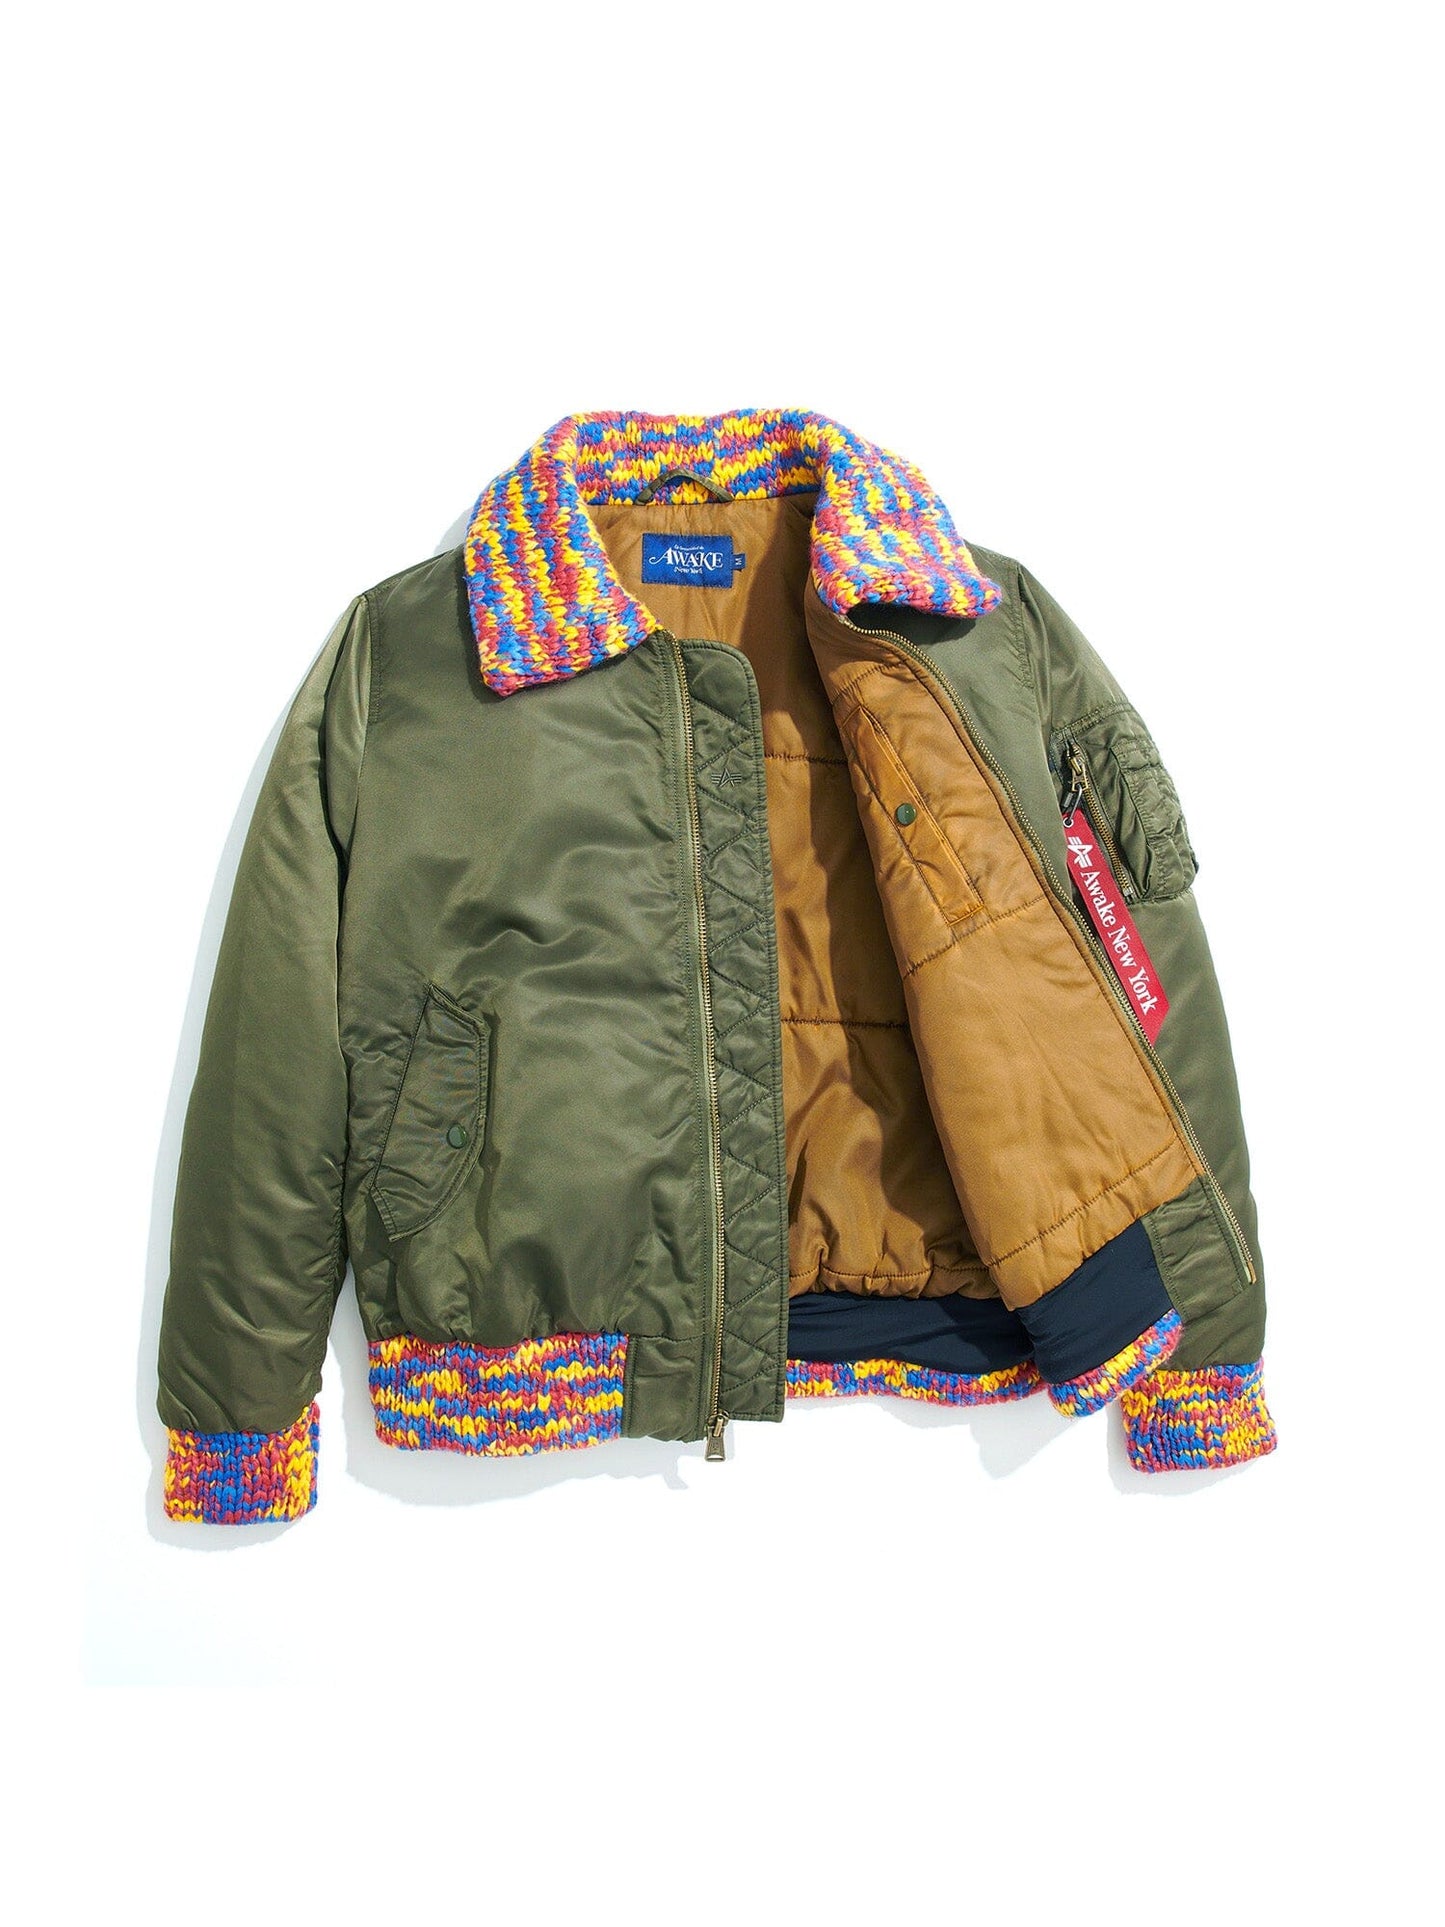 AWAKE X ALPHA MA-1 KNIT TRIMMED WASHED BOMBER JACKET OUTERWEAR Alpha Industries 